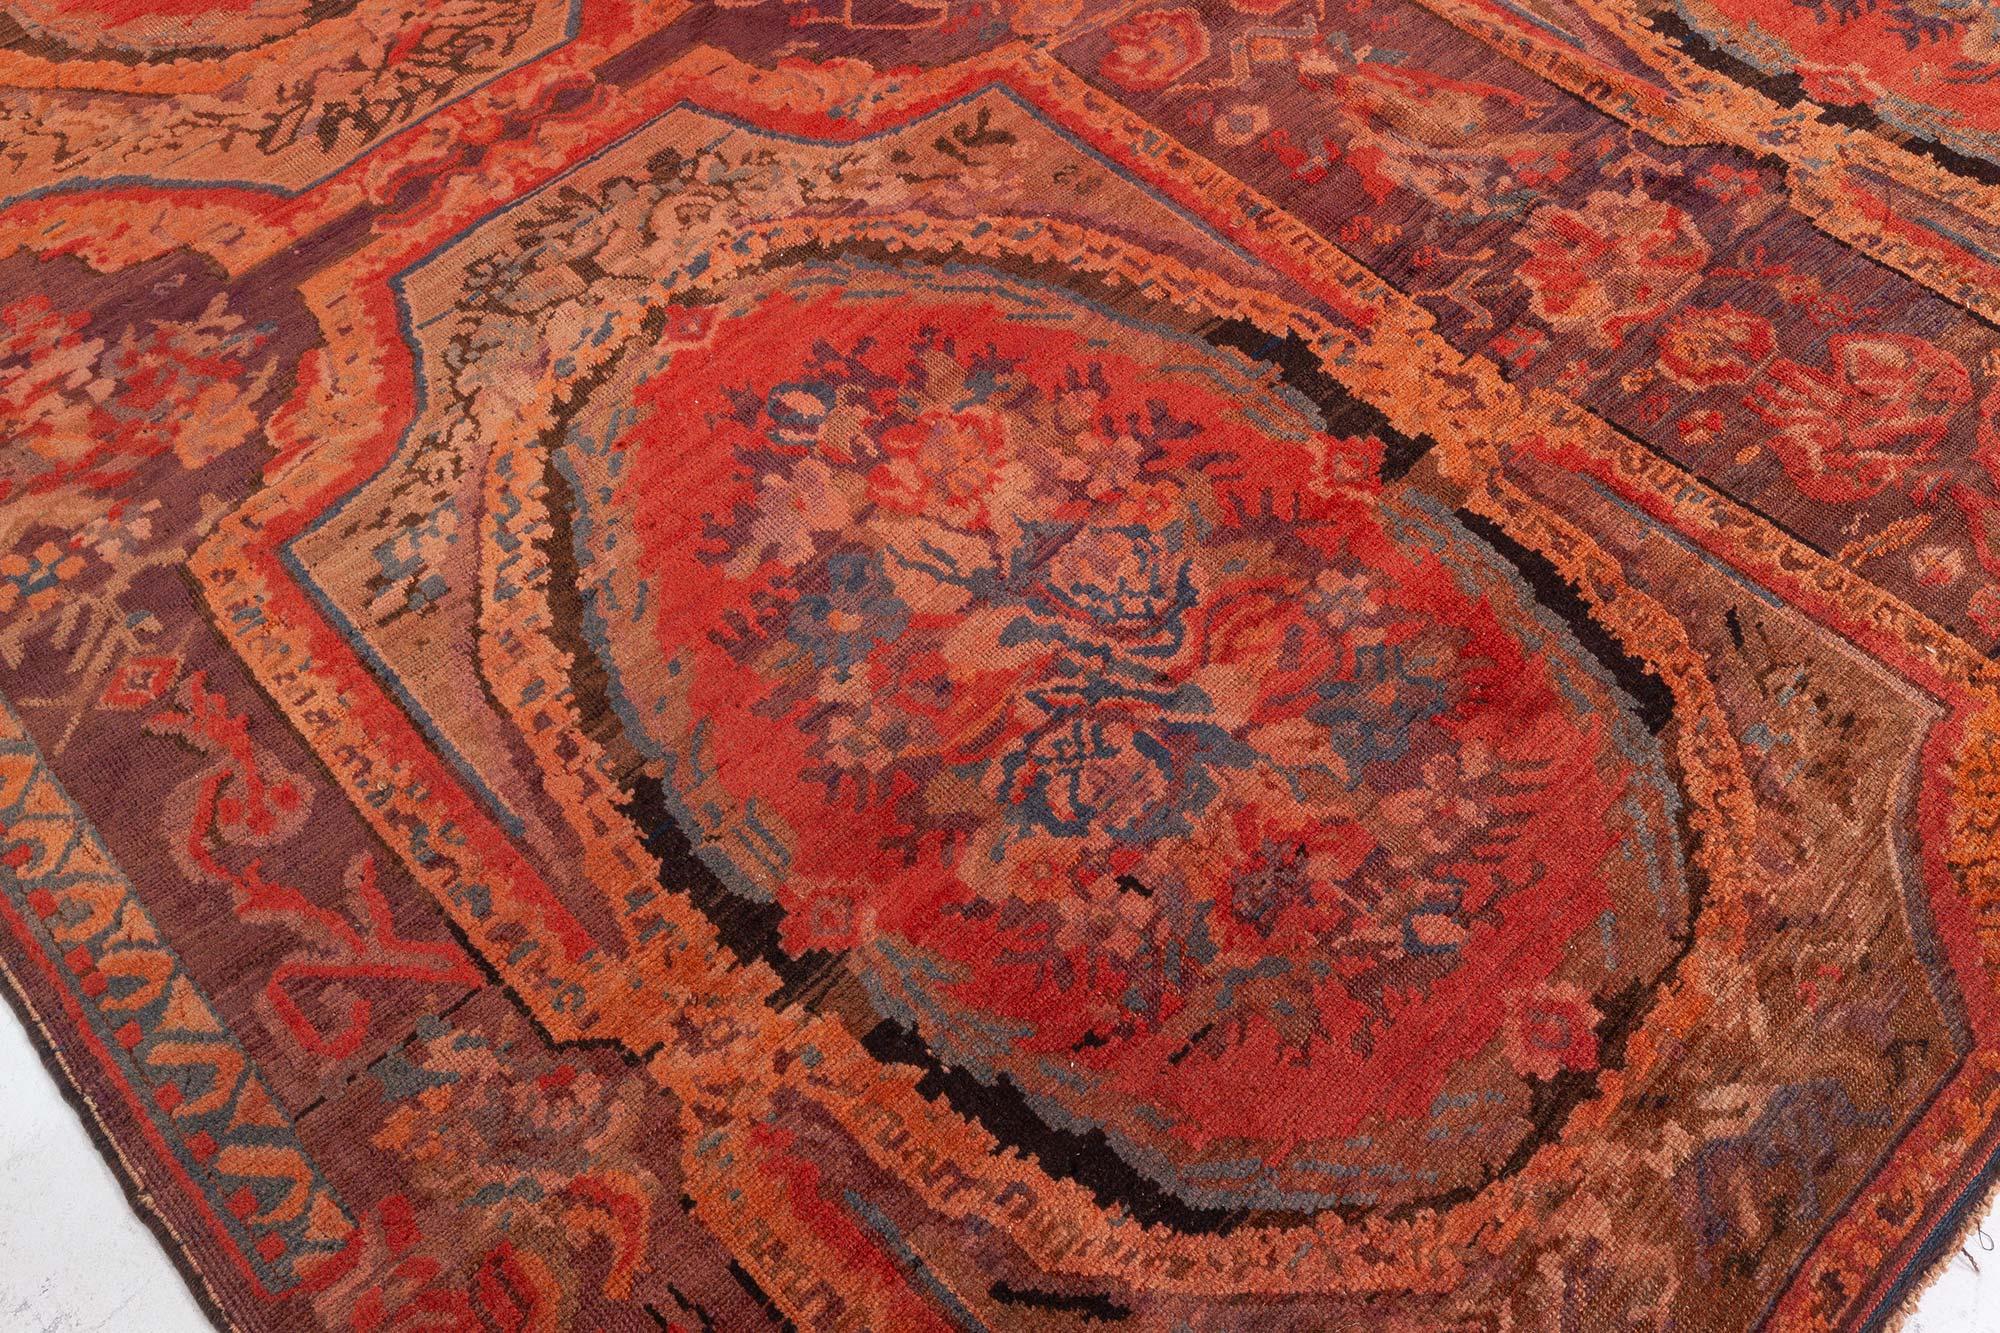 1900s Caucasian Karabagh Handmade Wool Rug In Good Condition For Sale In New York, NY